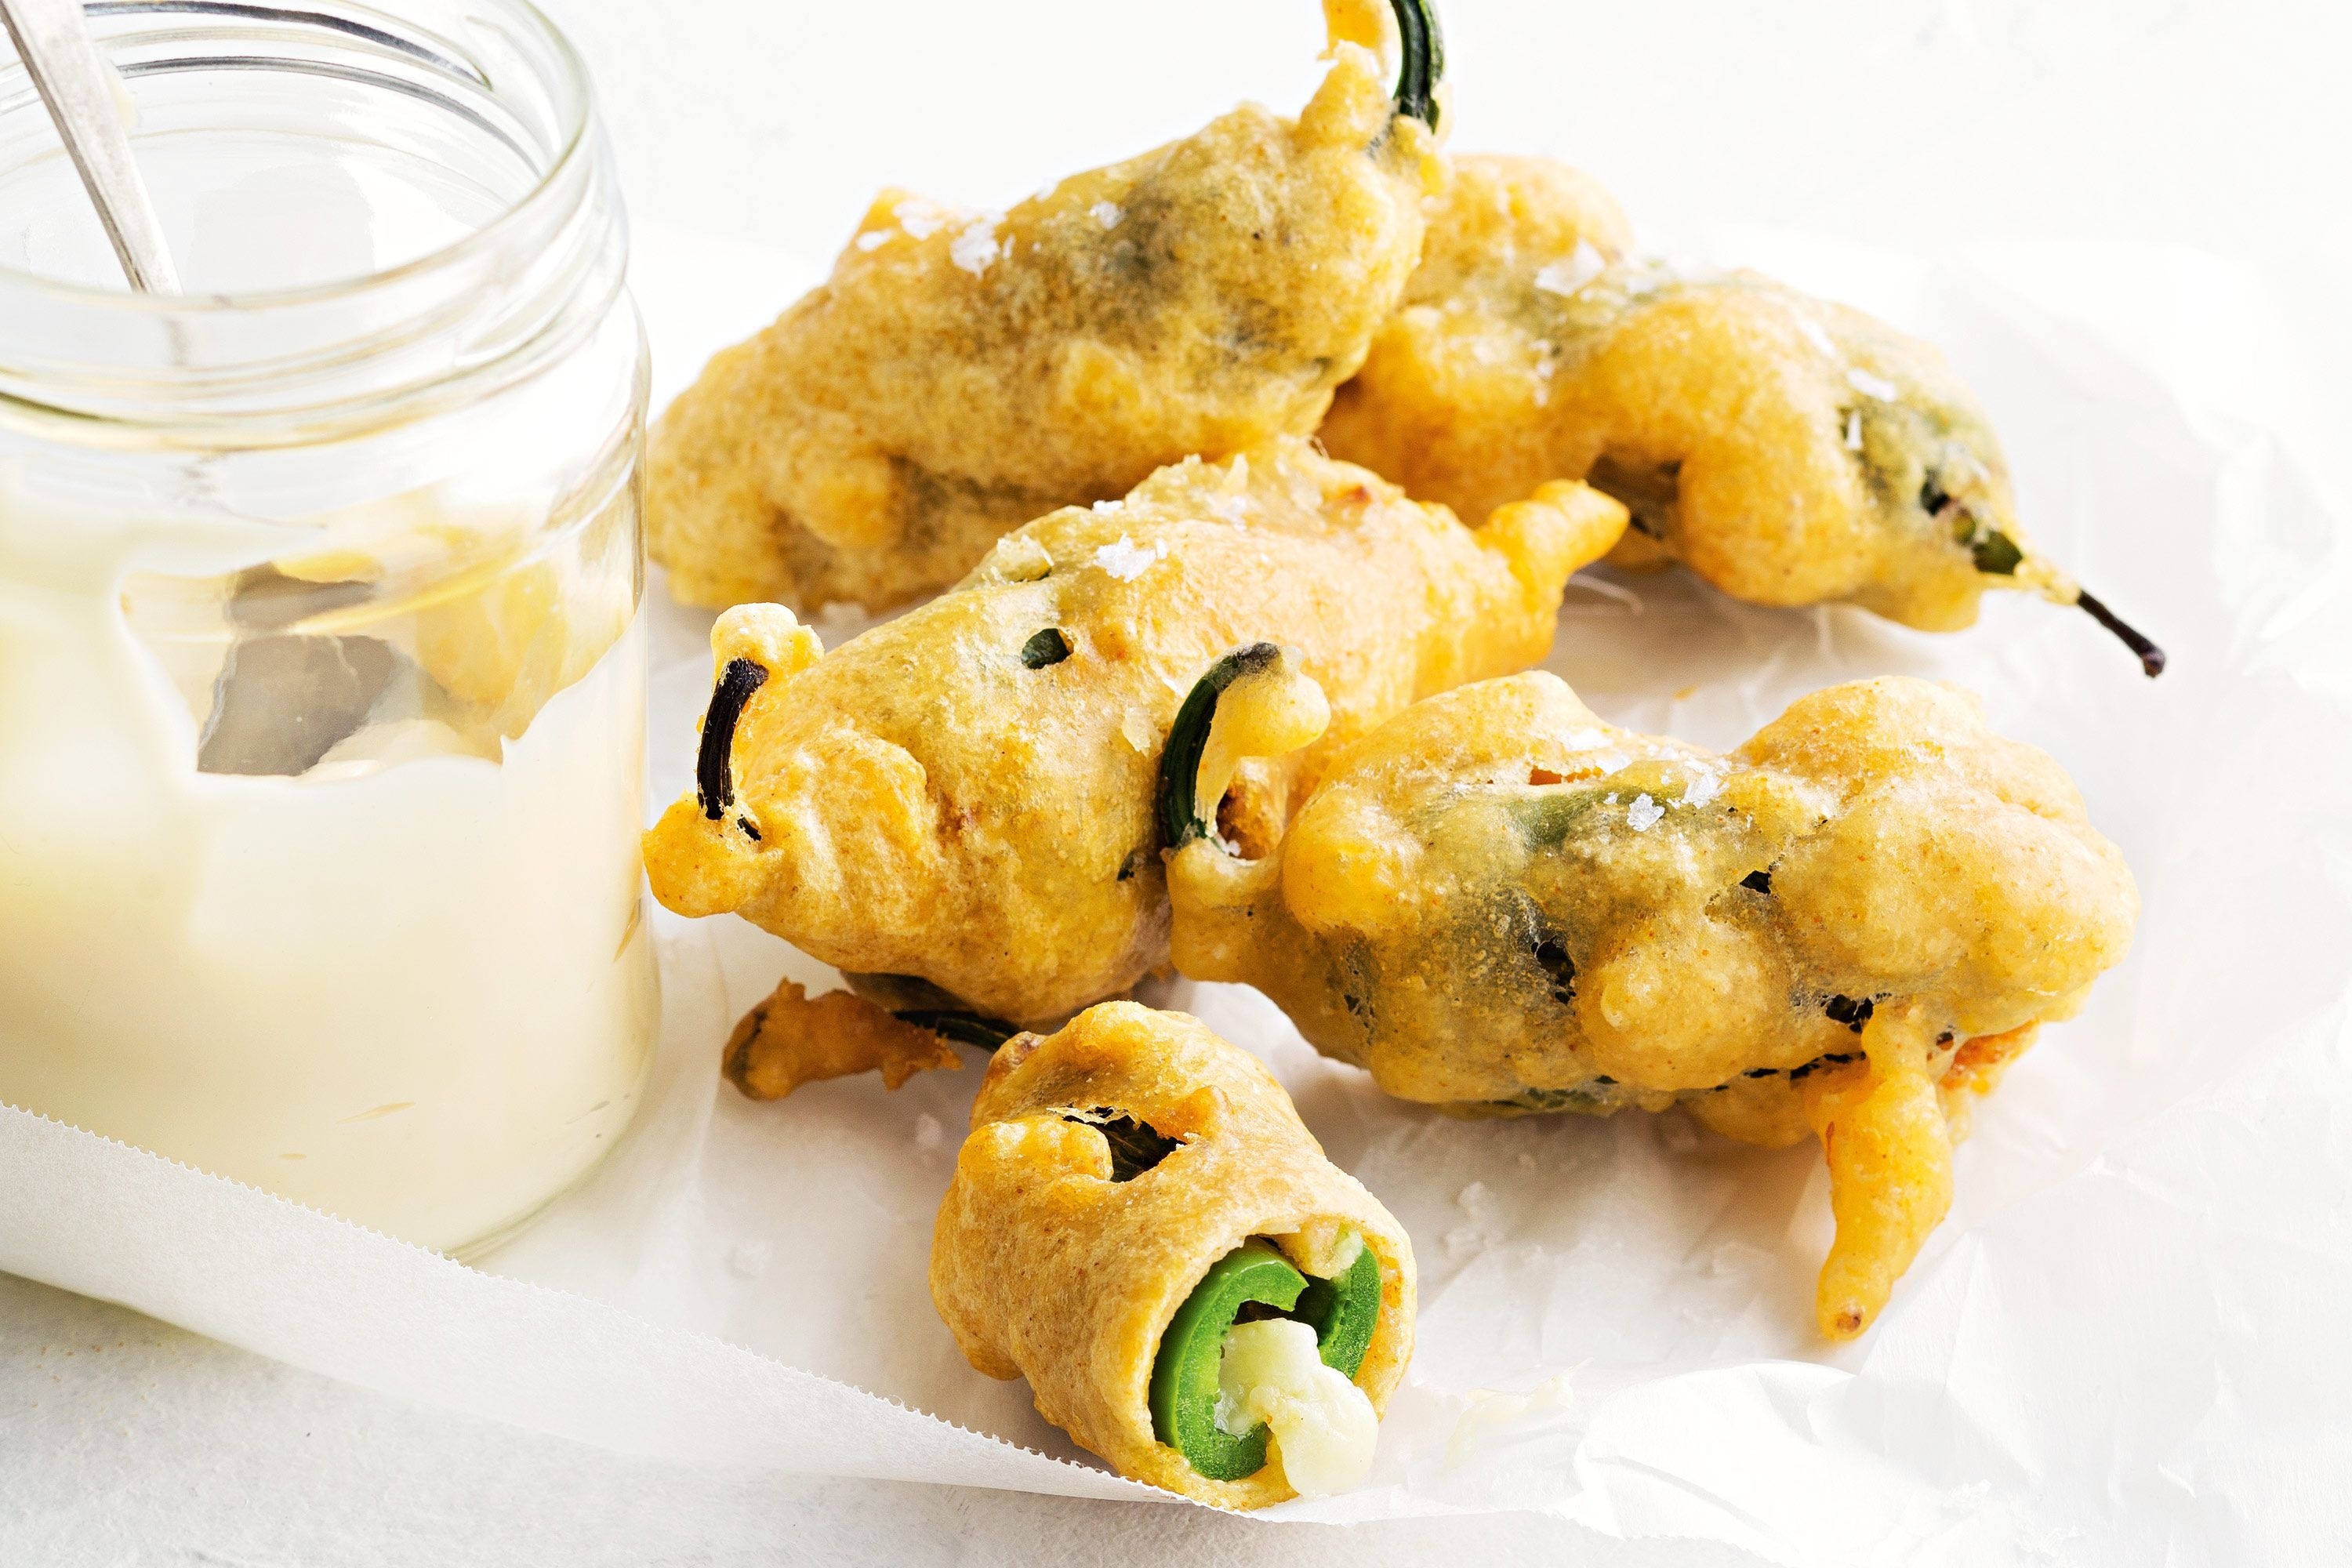 Jalapeno poppers, Spicy snack, Cheesy filling, Irresistible treat, 3000x2000 HD Desktop